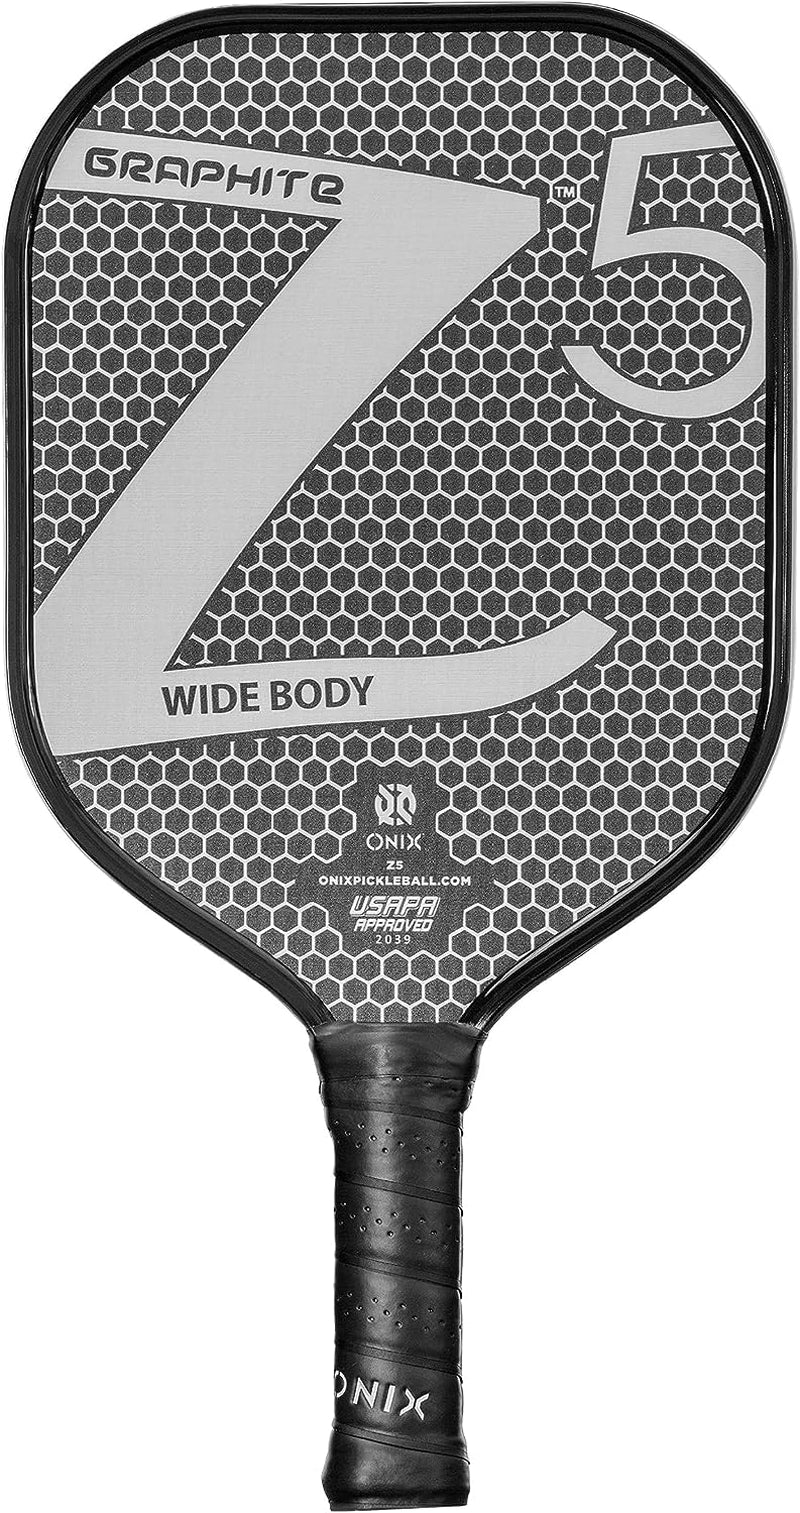 "Experience the Ultimate Performance with  Graphite Z5 Pickleball Paddles - Lightweight, Durable and Comfortable Grip - Officially Approved by USA Pickleball"